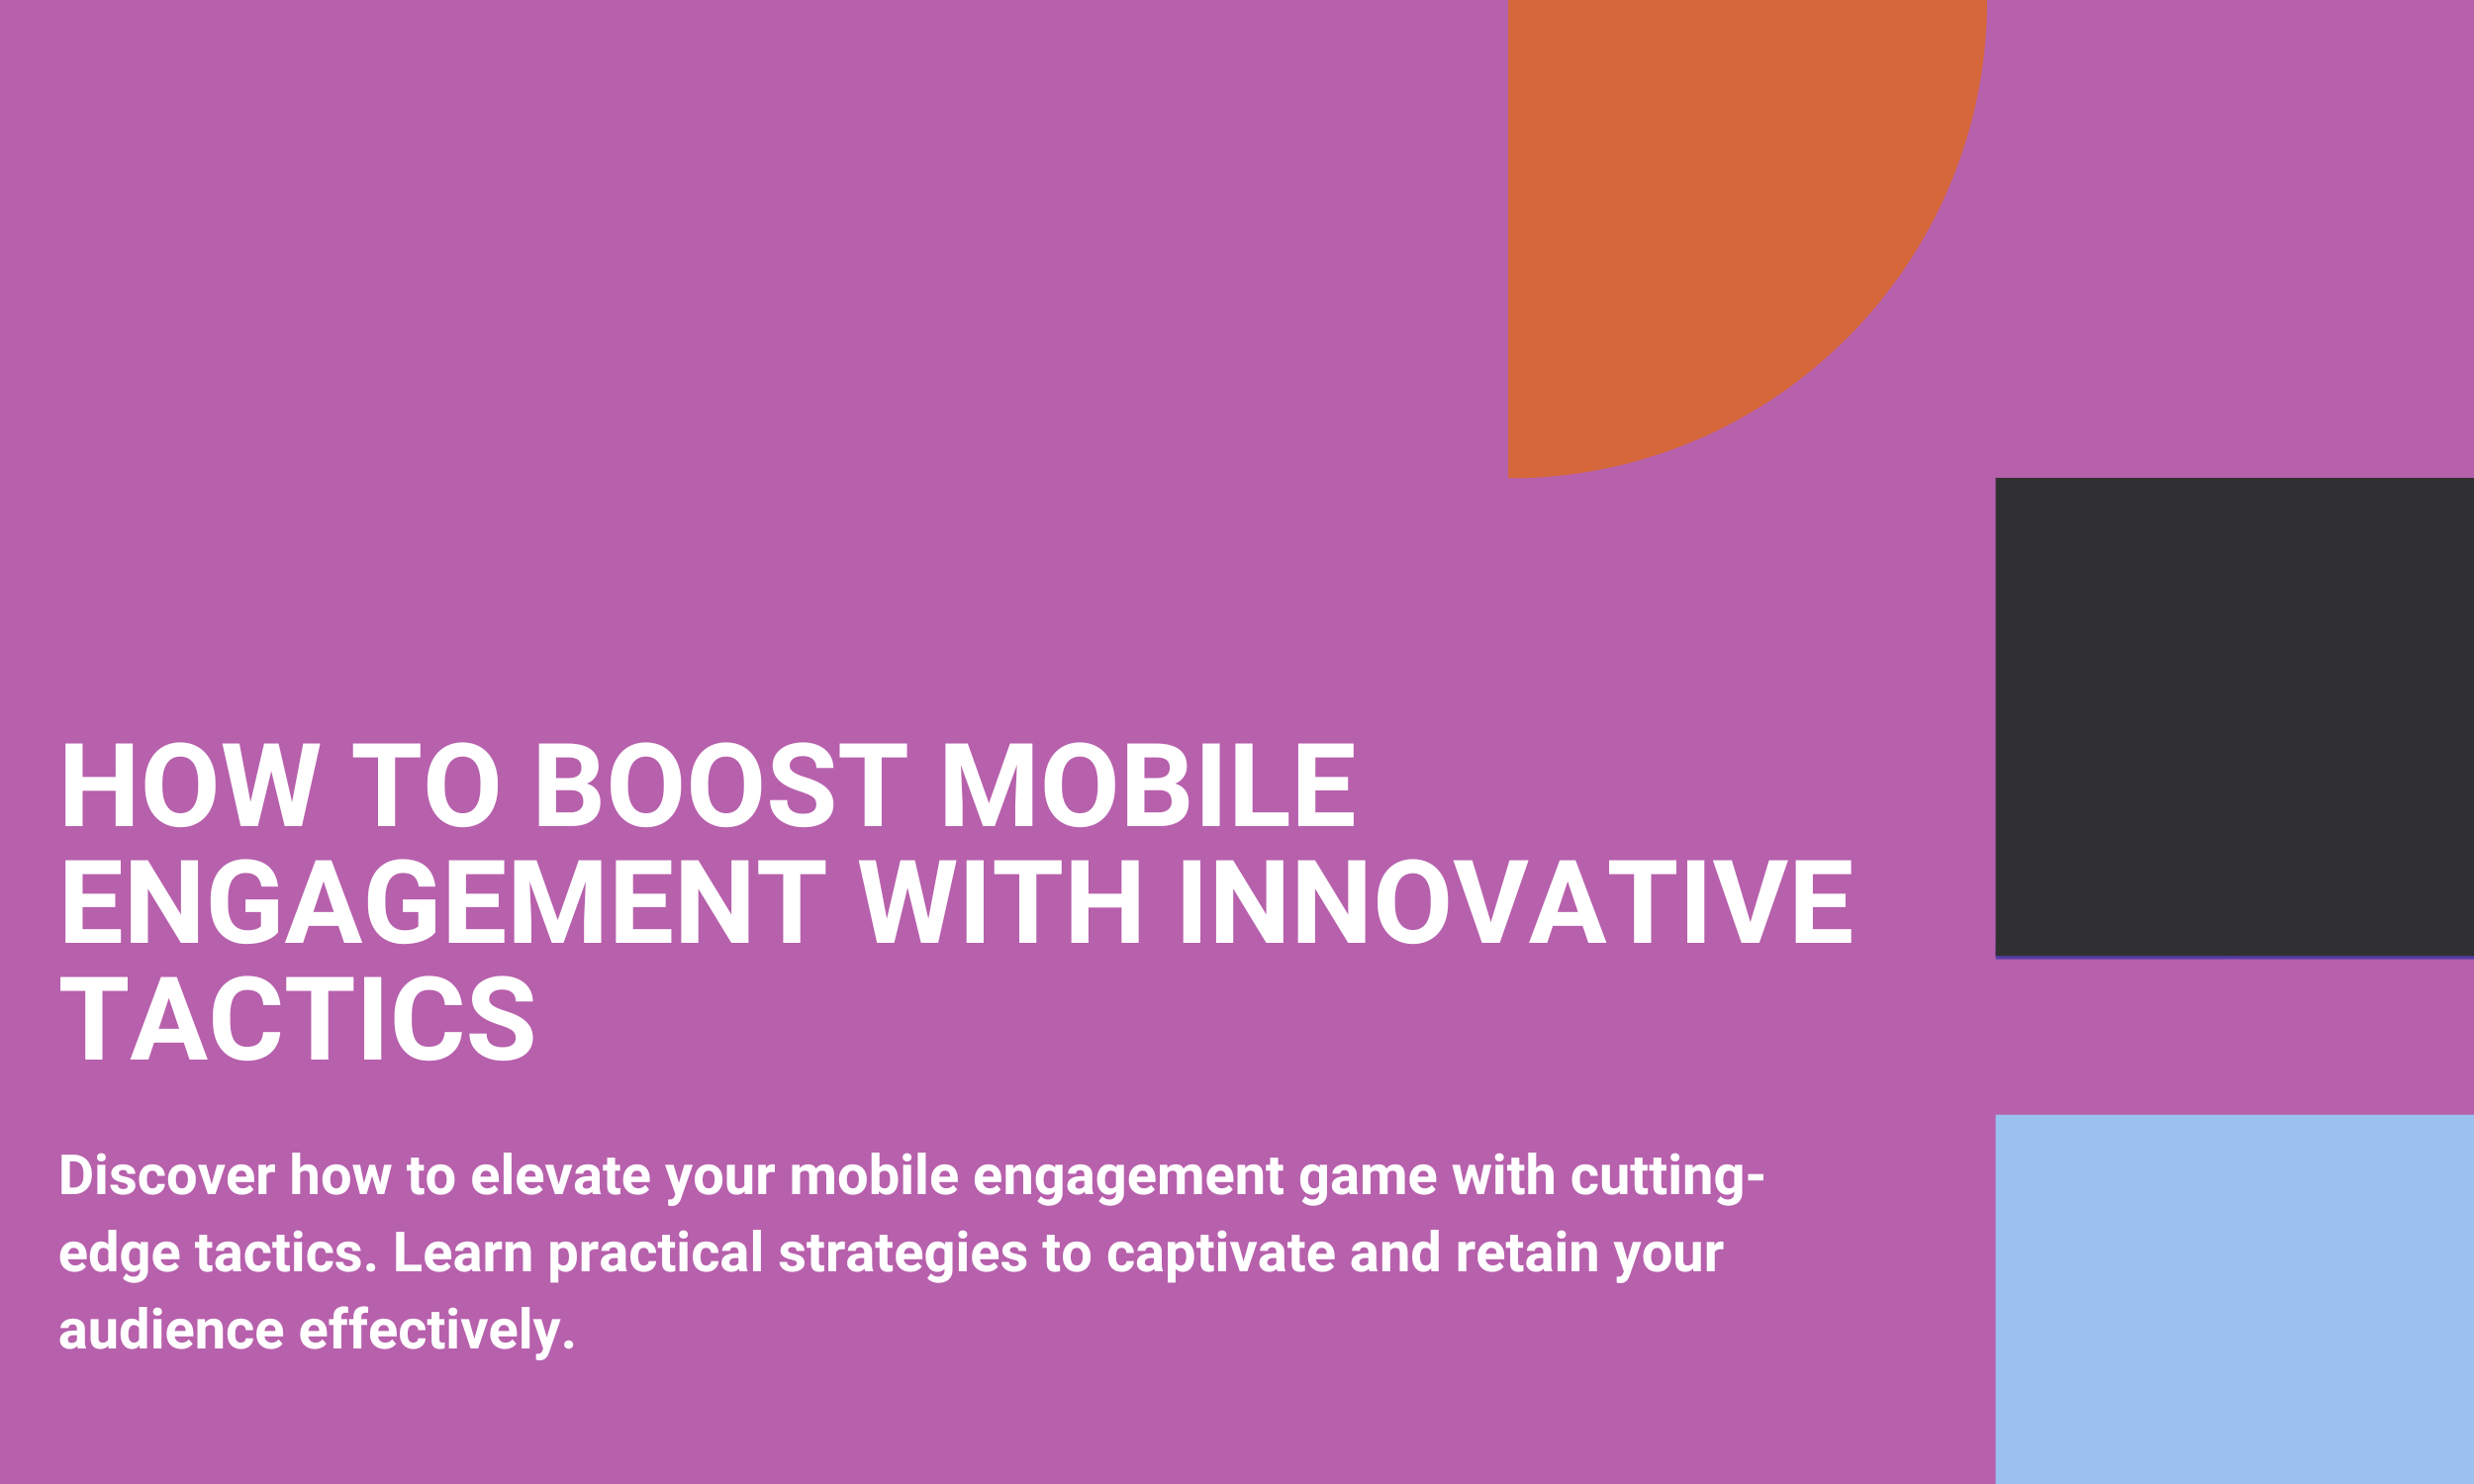 How to Boost Mobile Engagement with Innovative Tactics